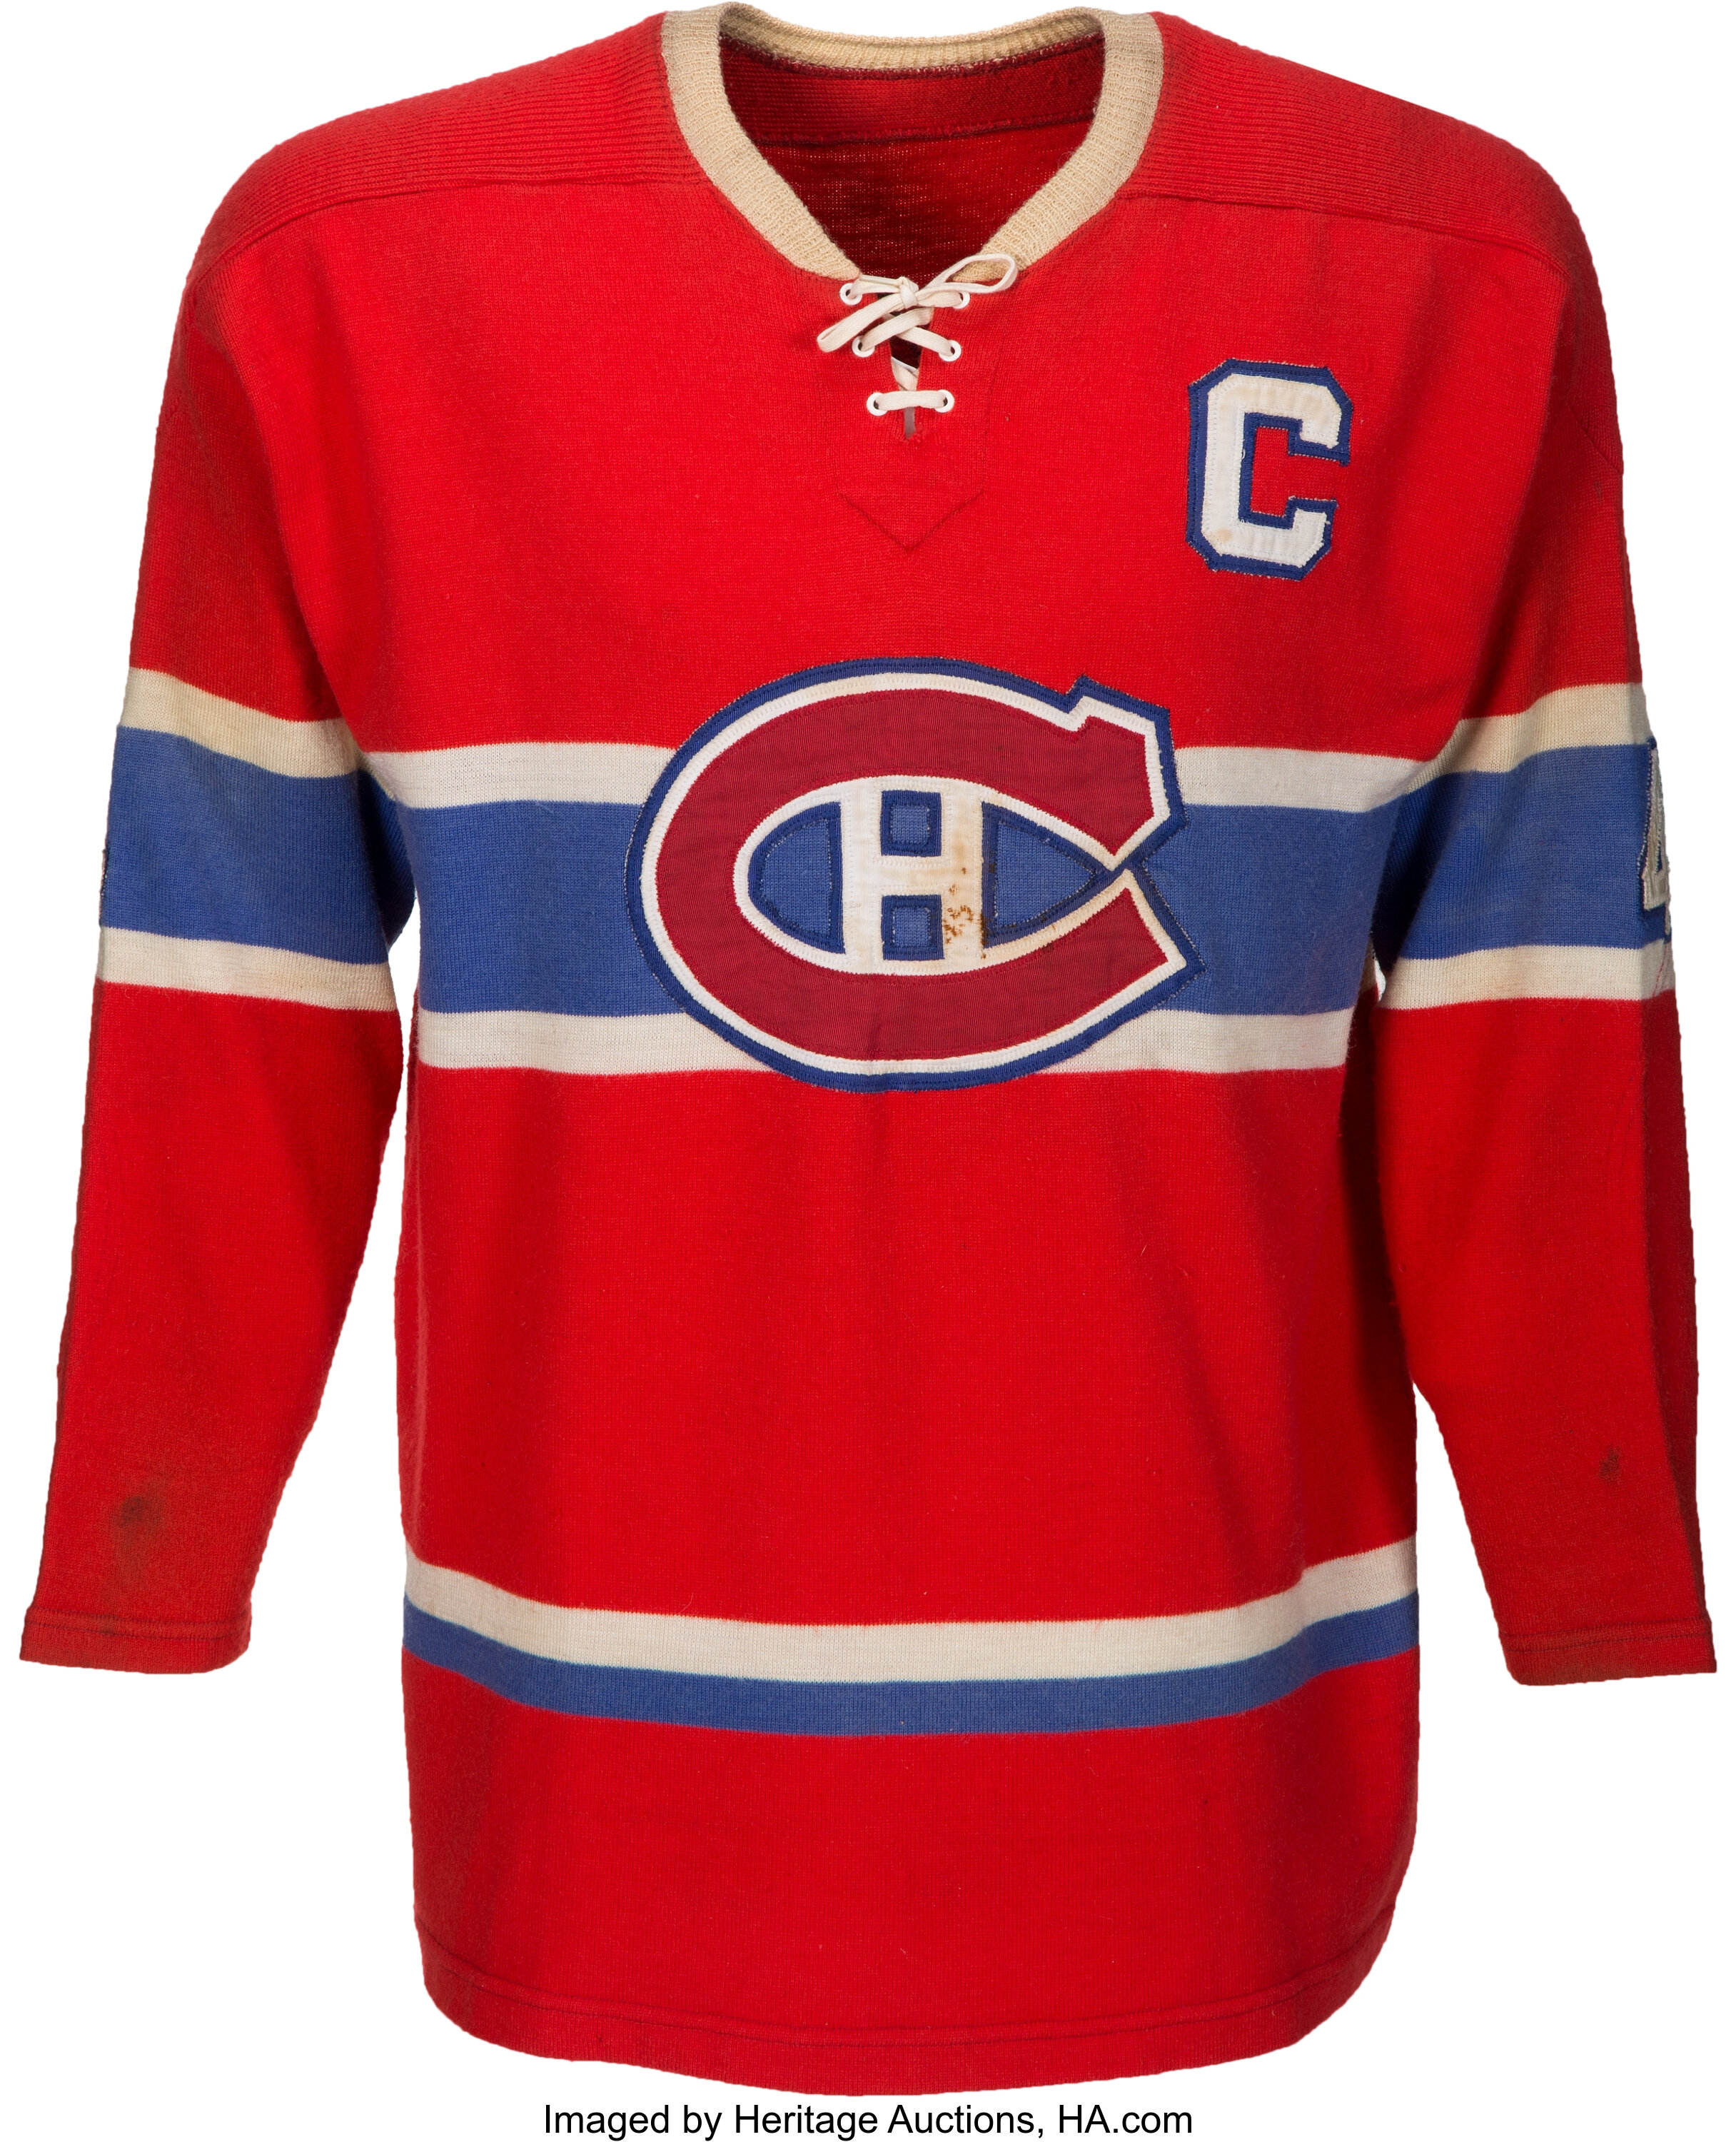 Are the Montreal Canadiens Cursed by the Retro Jerseys?